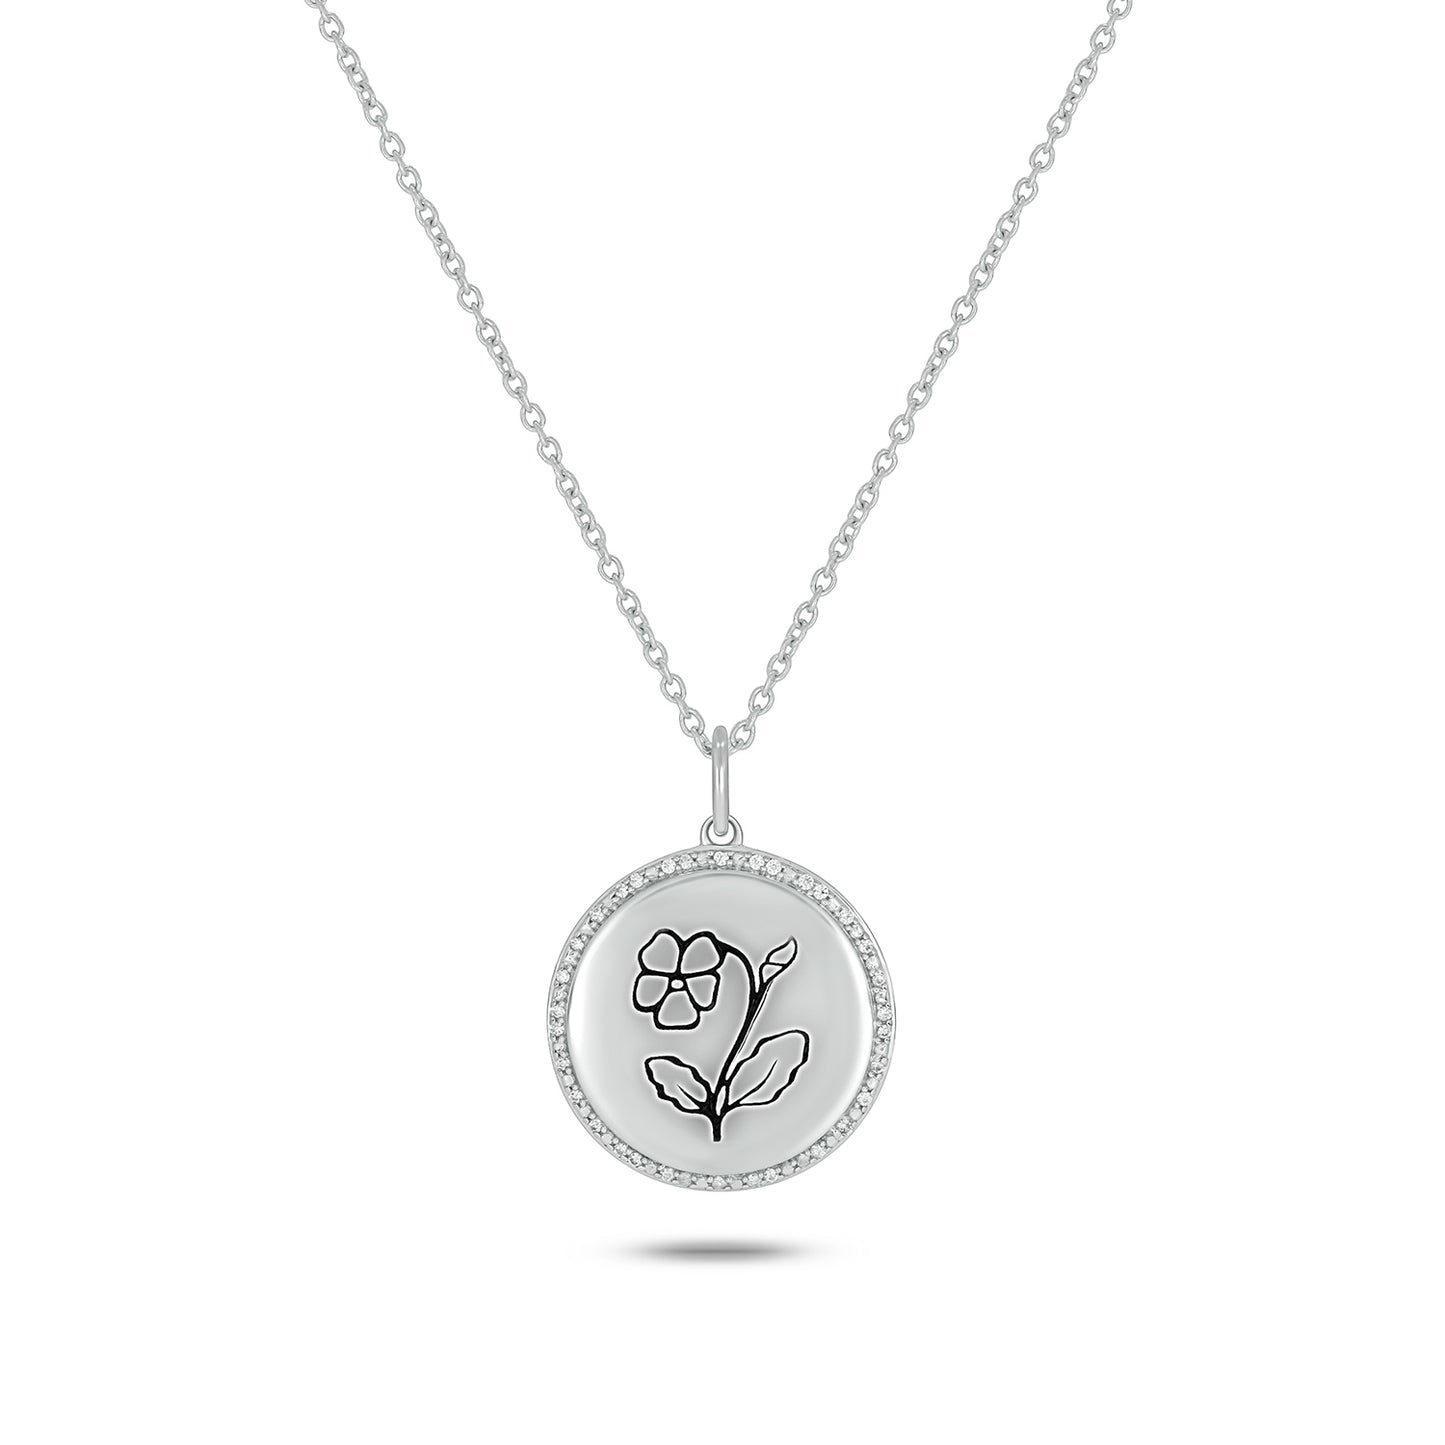 Bespoke Personalized Birth Flower Pendant In 925 Sterling Silver With Natural Diamonds